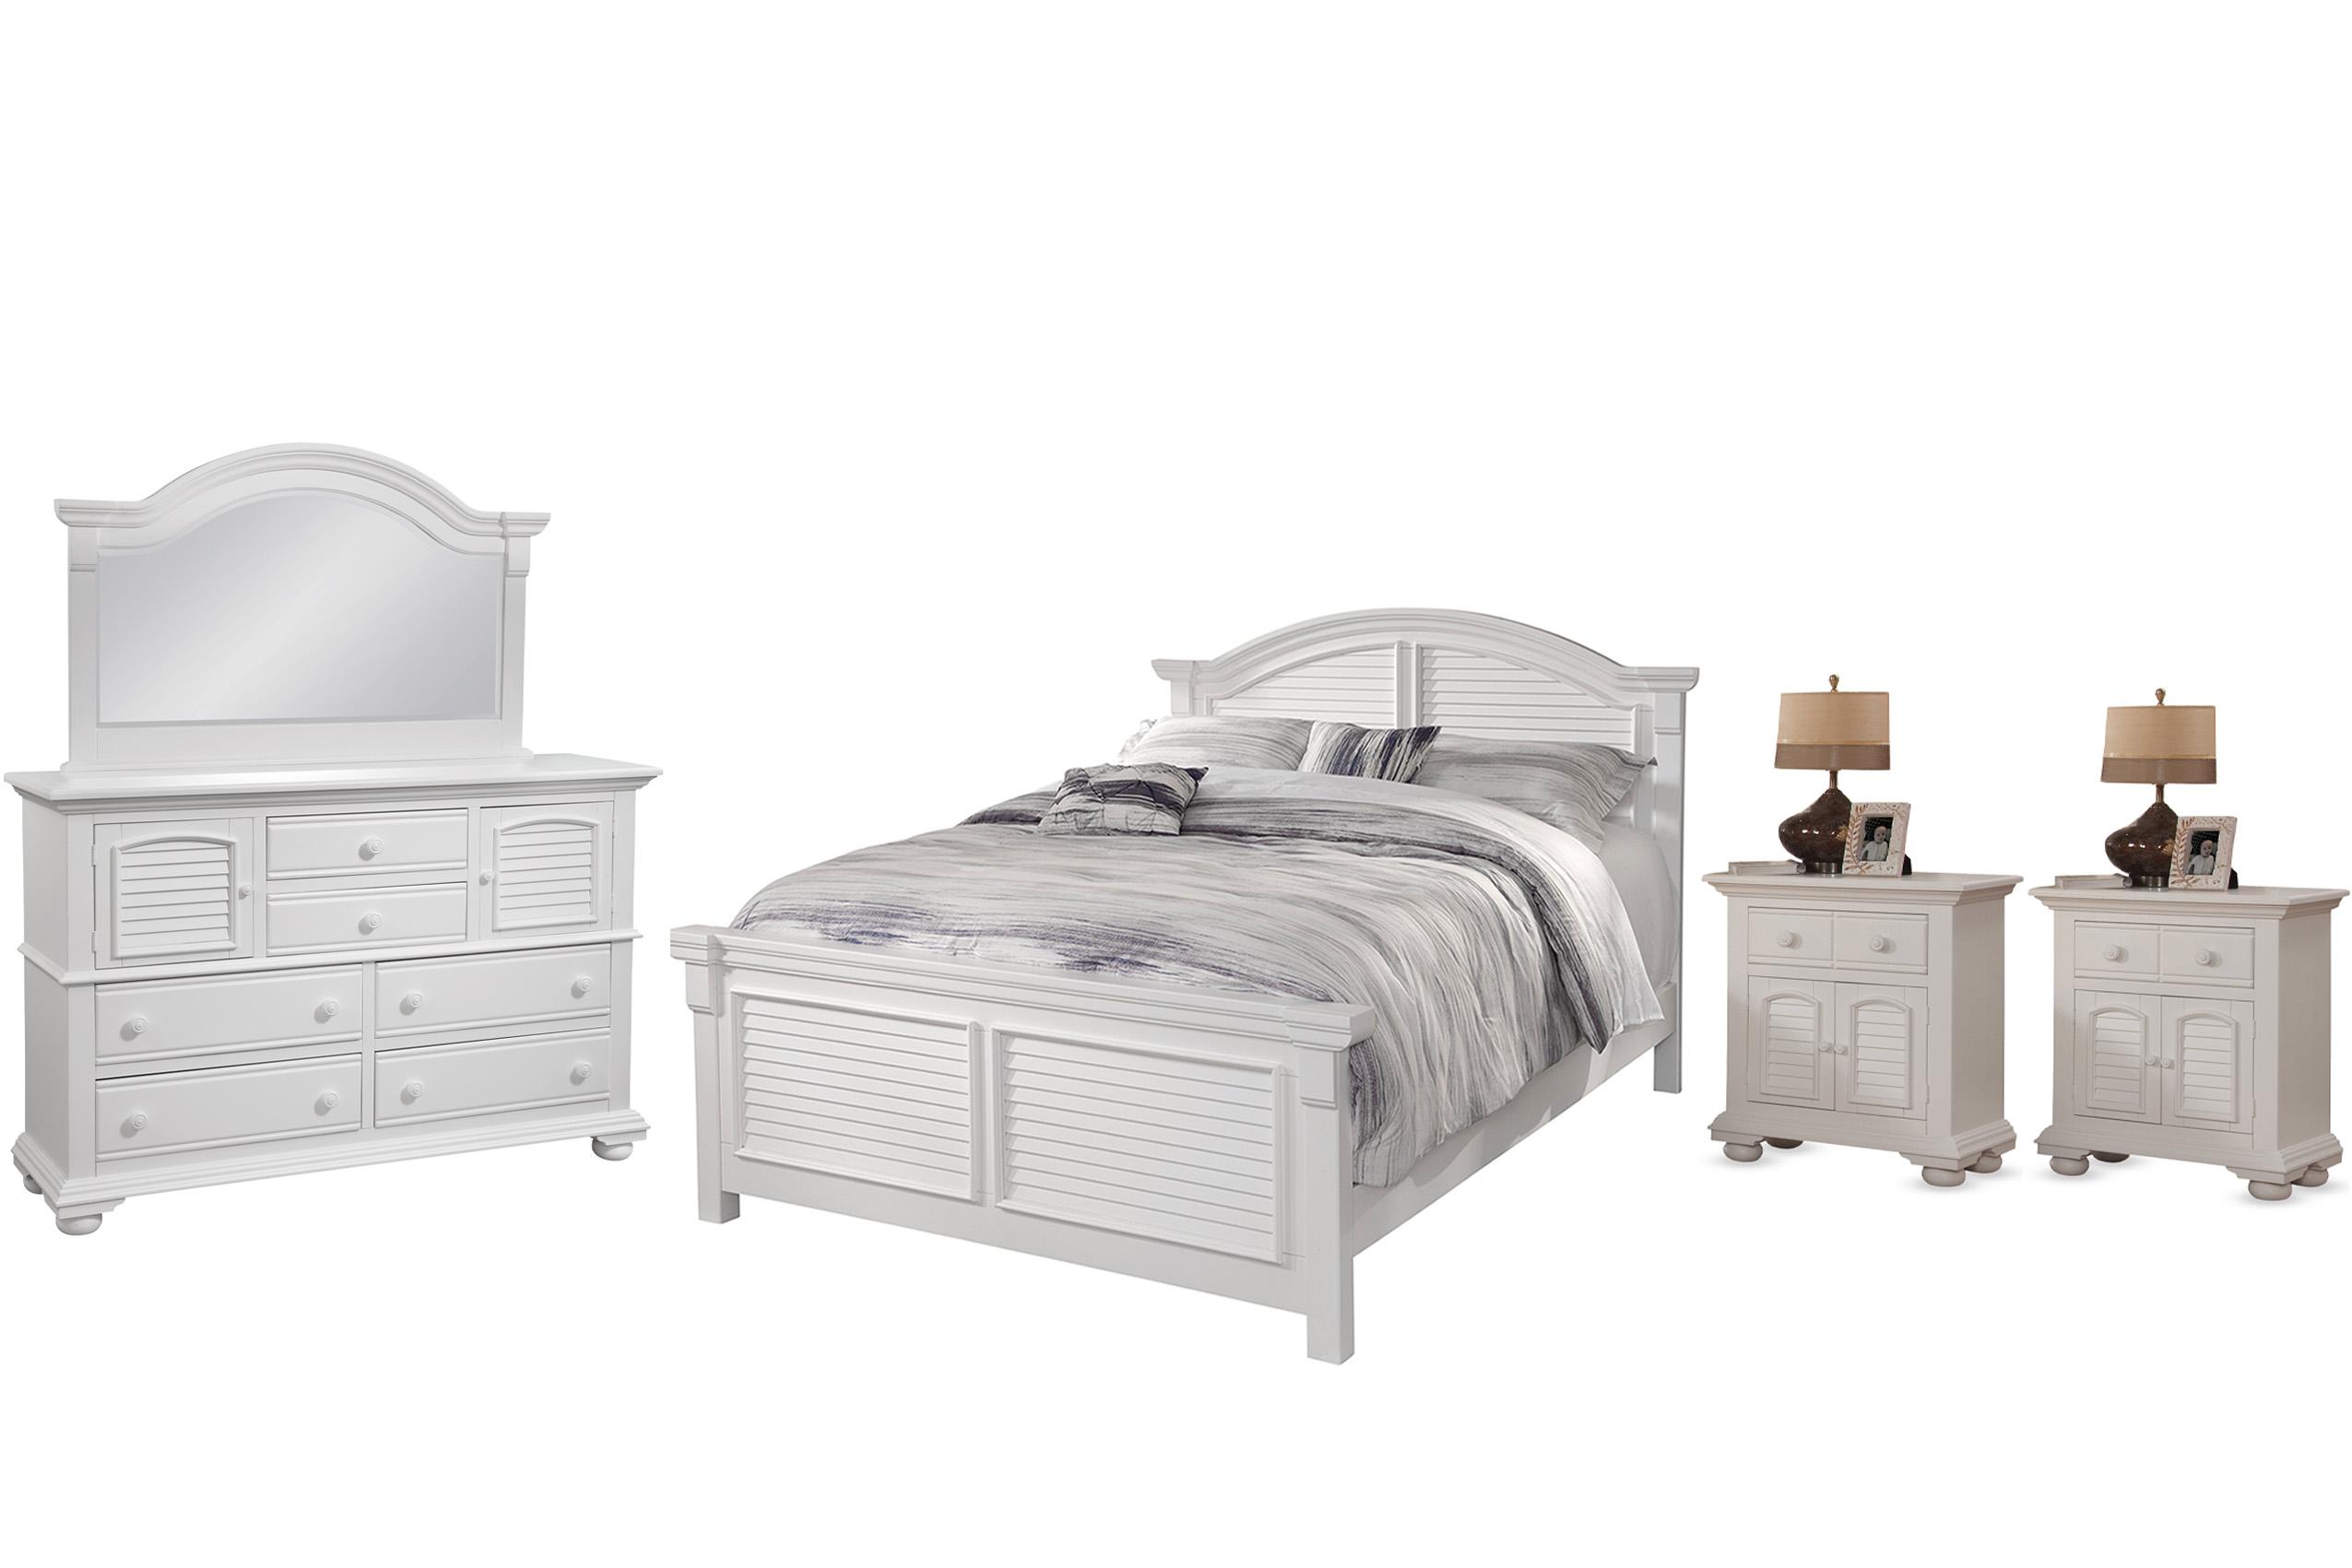 Classic, Traditional, Cottage Panel Bedroom Set COTTAGE 6510-66PAN 6510-66PAN 6510-412-2NDM-5PC in White 